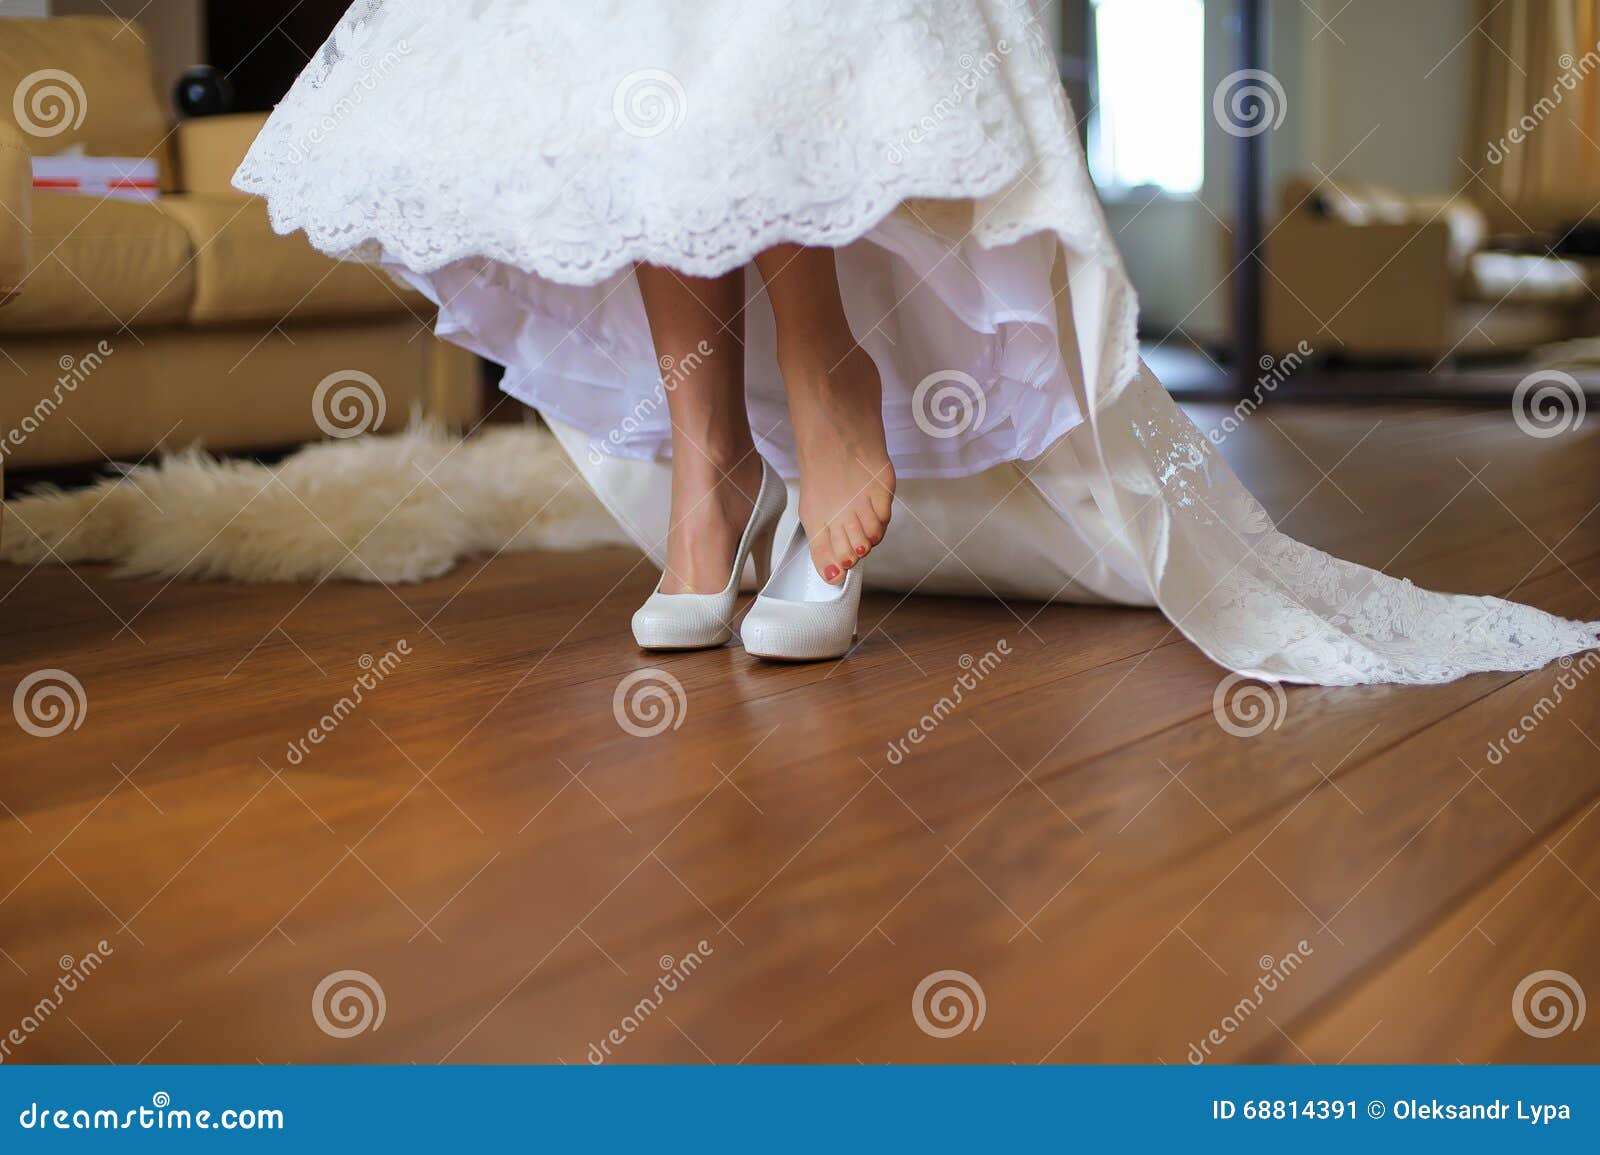 Bride Puts on Shoes in Room Stock Image - Image of concept, female ...